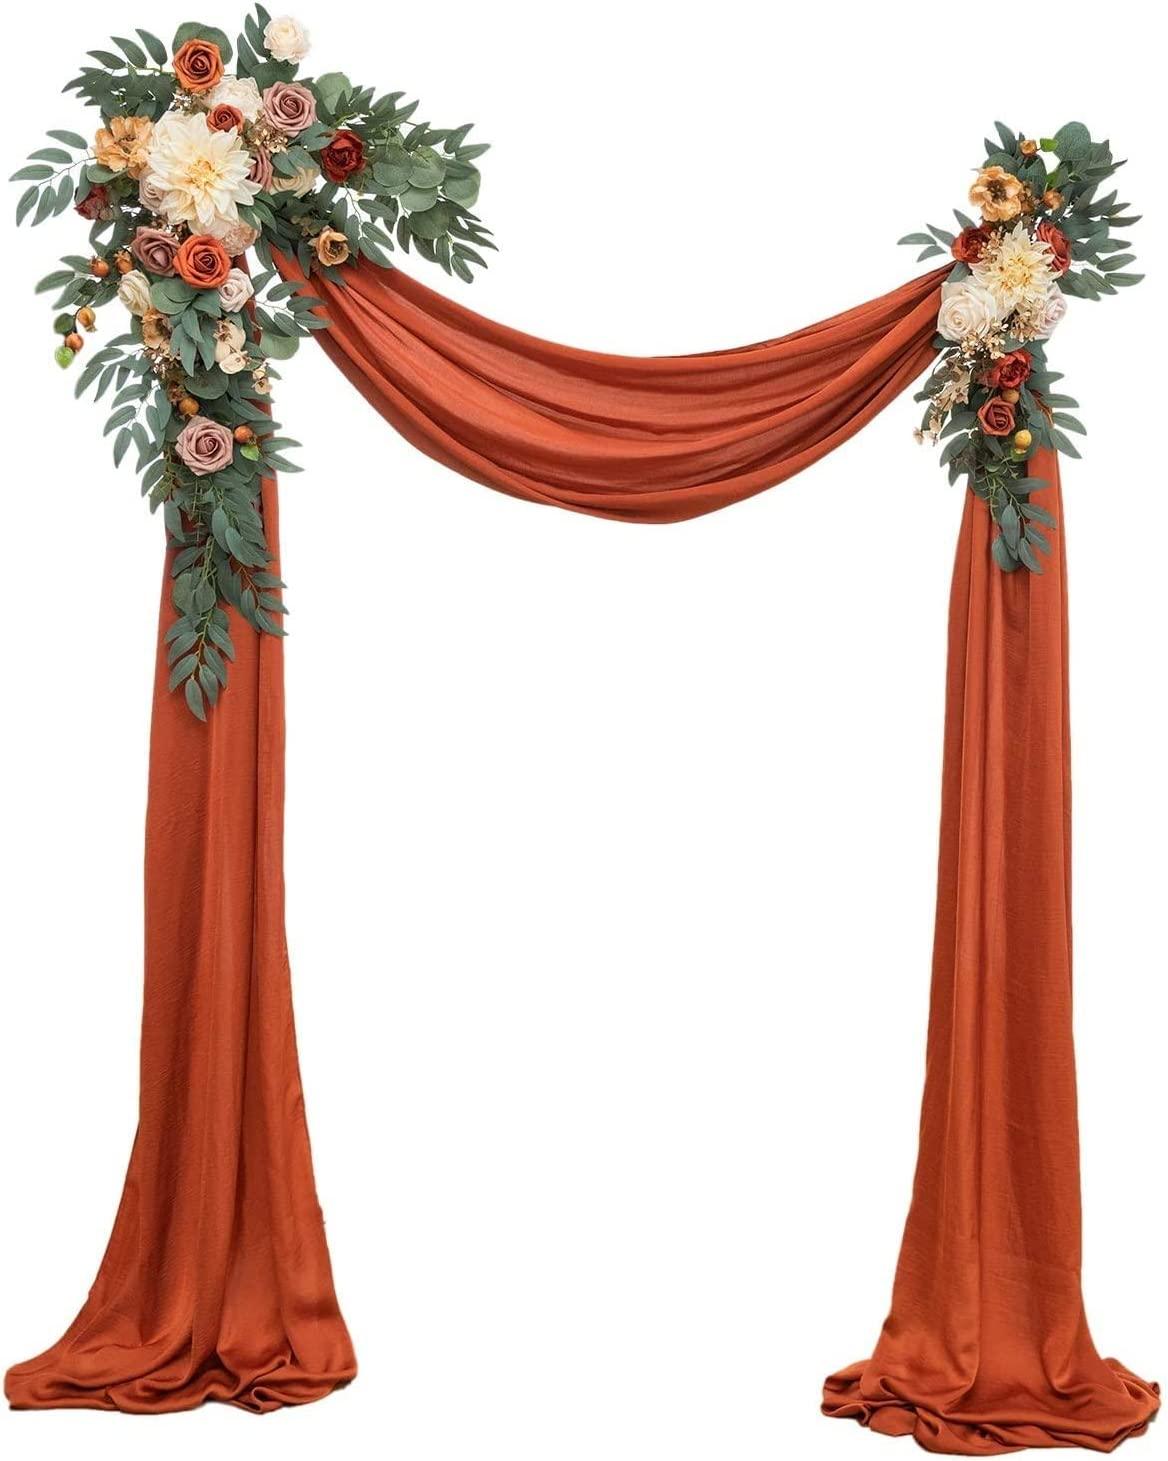 Wedding Arch Floral Swag Set Artificial Arch Flowers Wedding Arch Draping Fabric for Ceremony and Reception - Decotree.co Online Shop